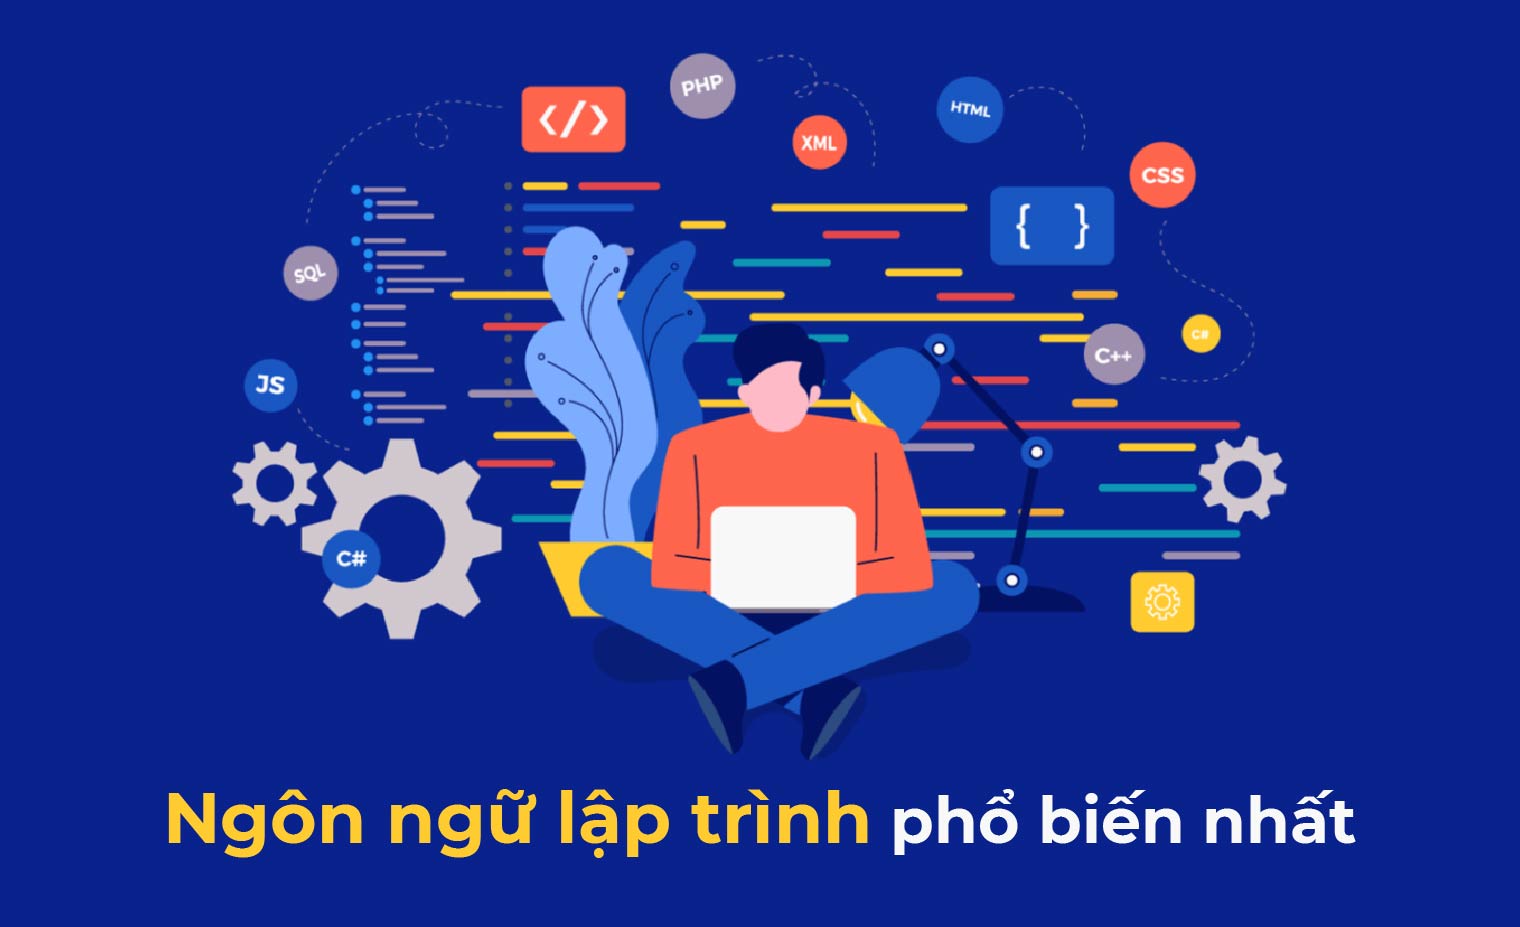 PHP – Wikipedia tiếng Việt